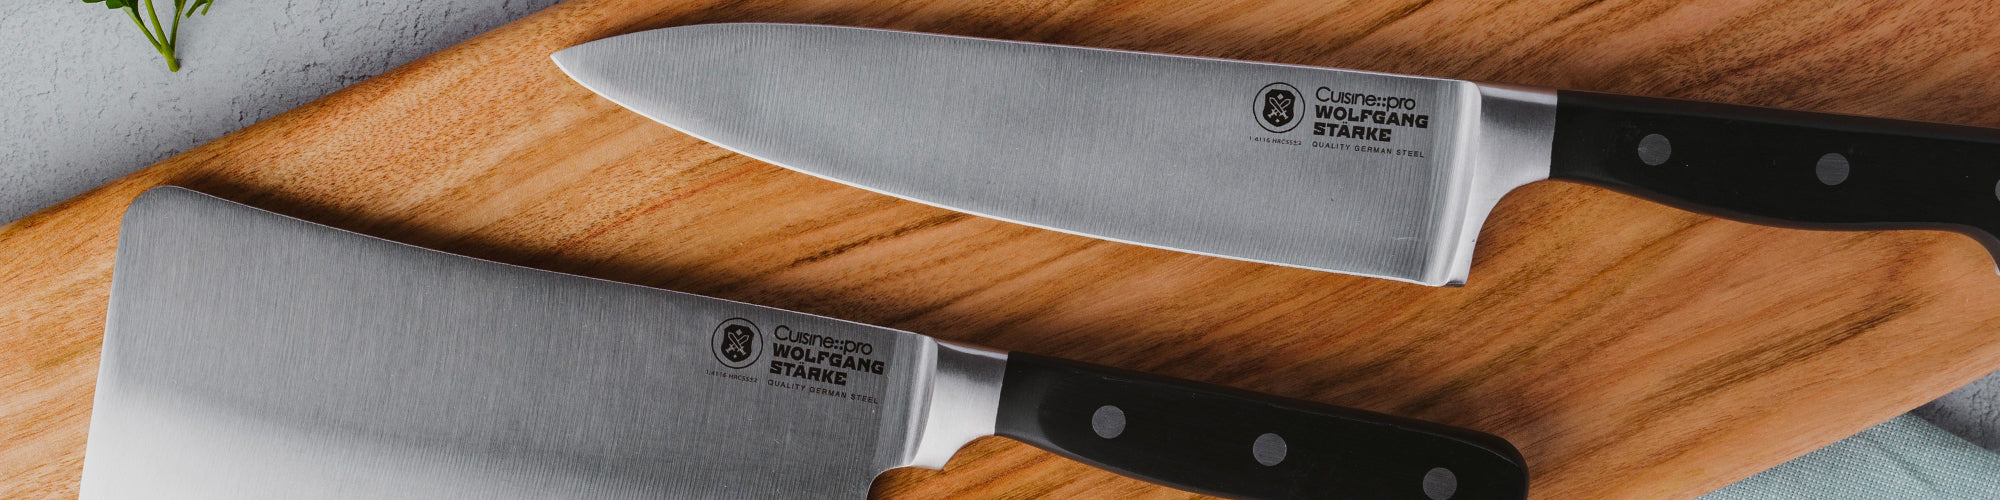 This best-selling  knife set is 62% off right now